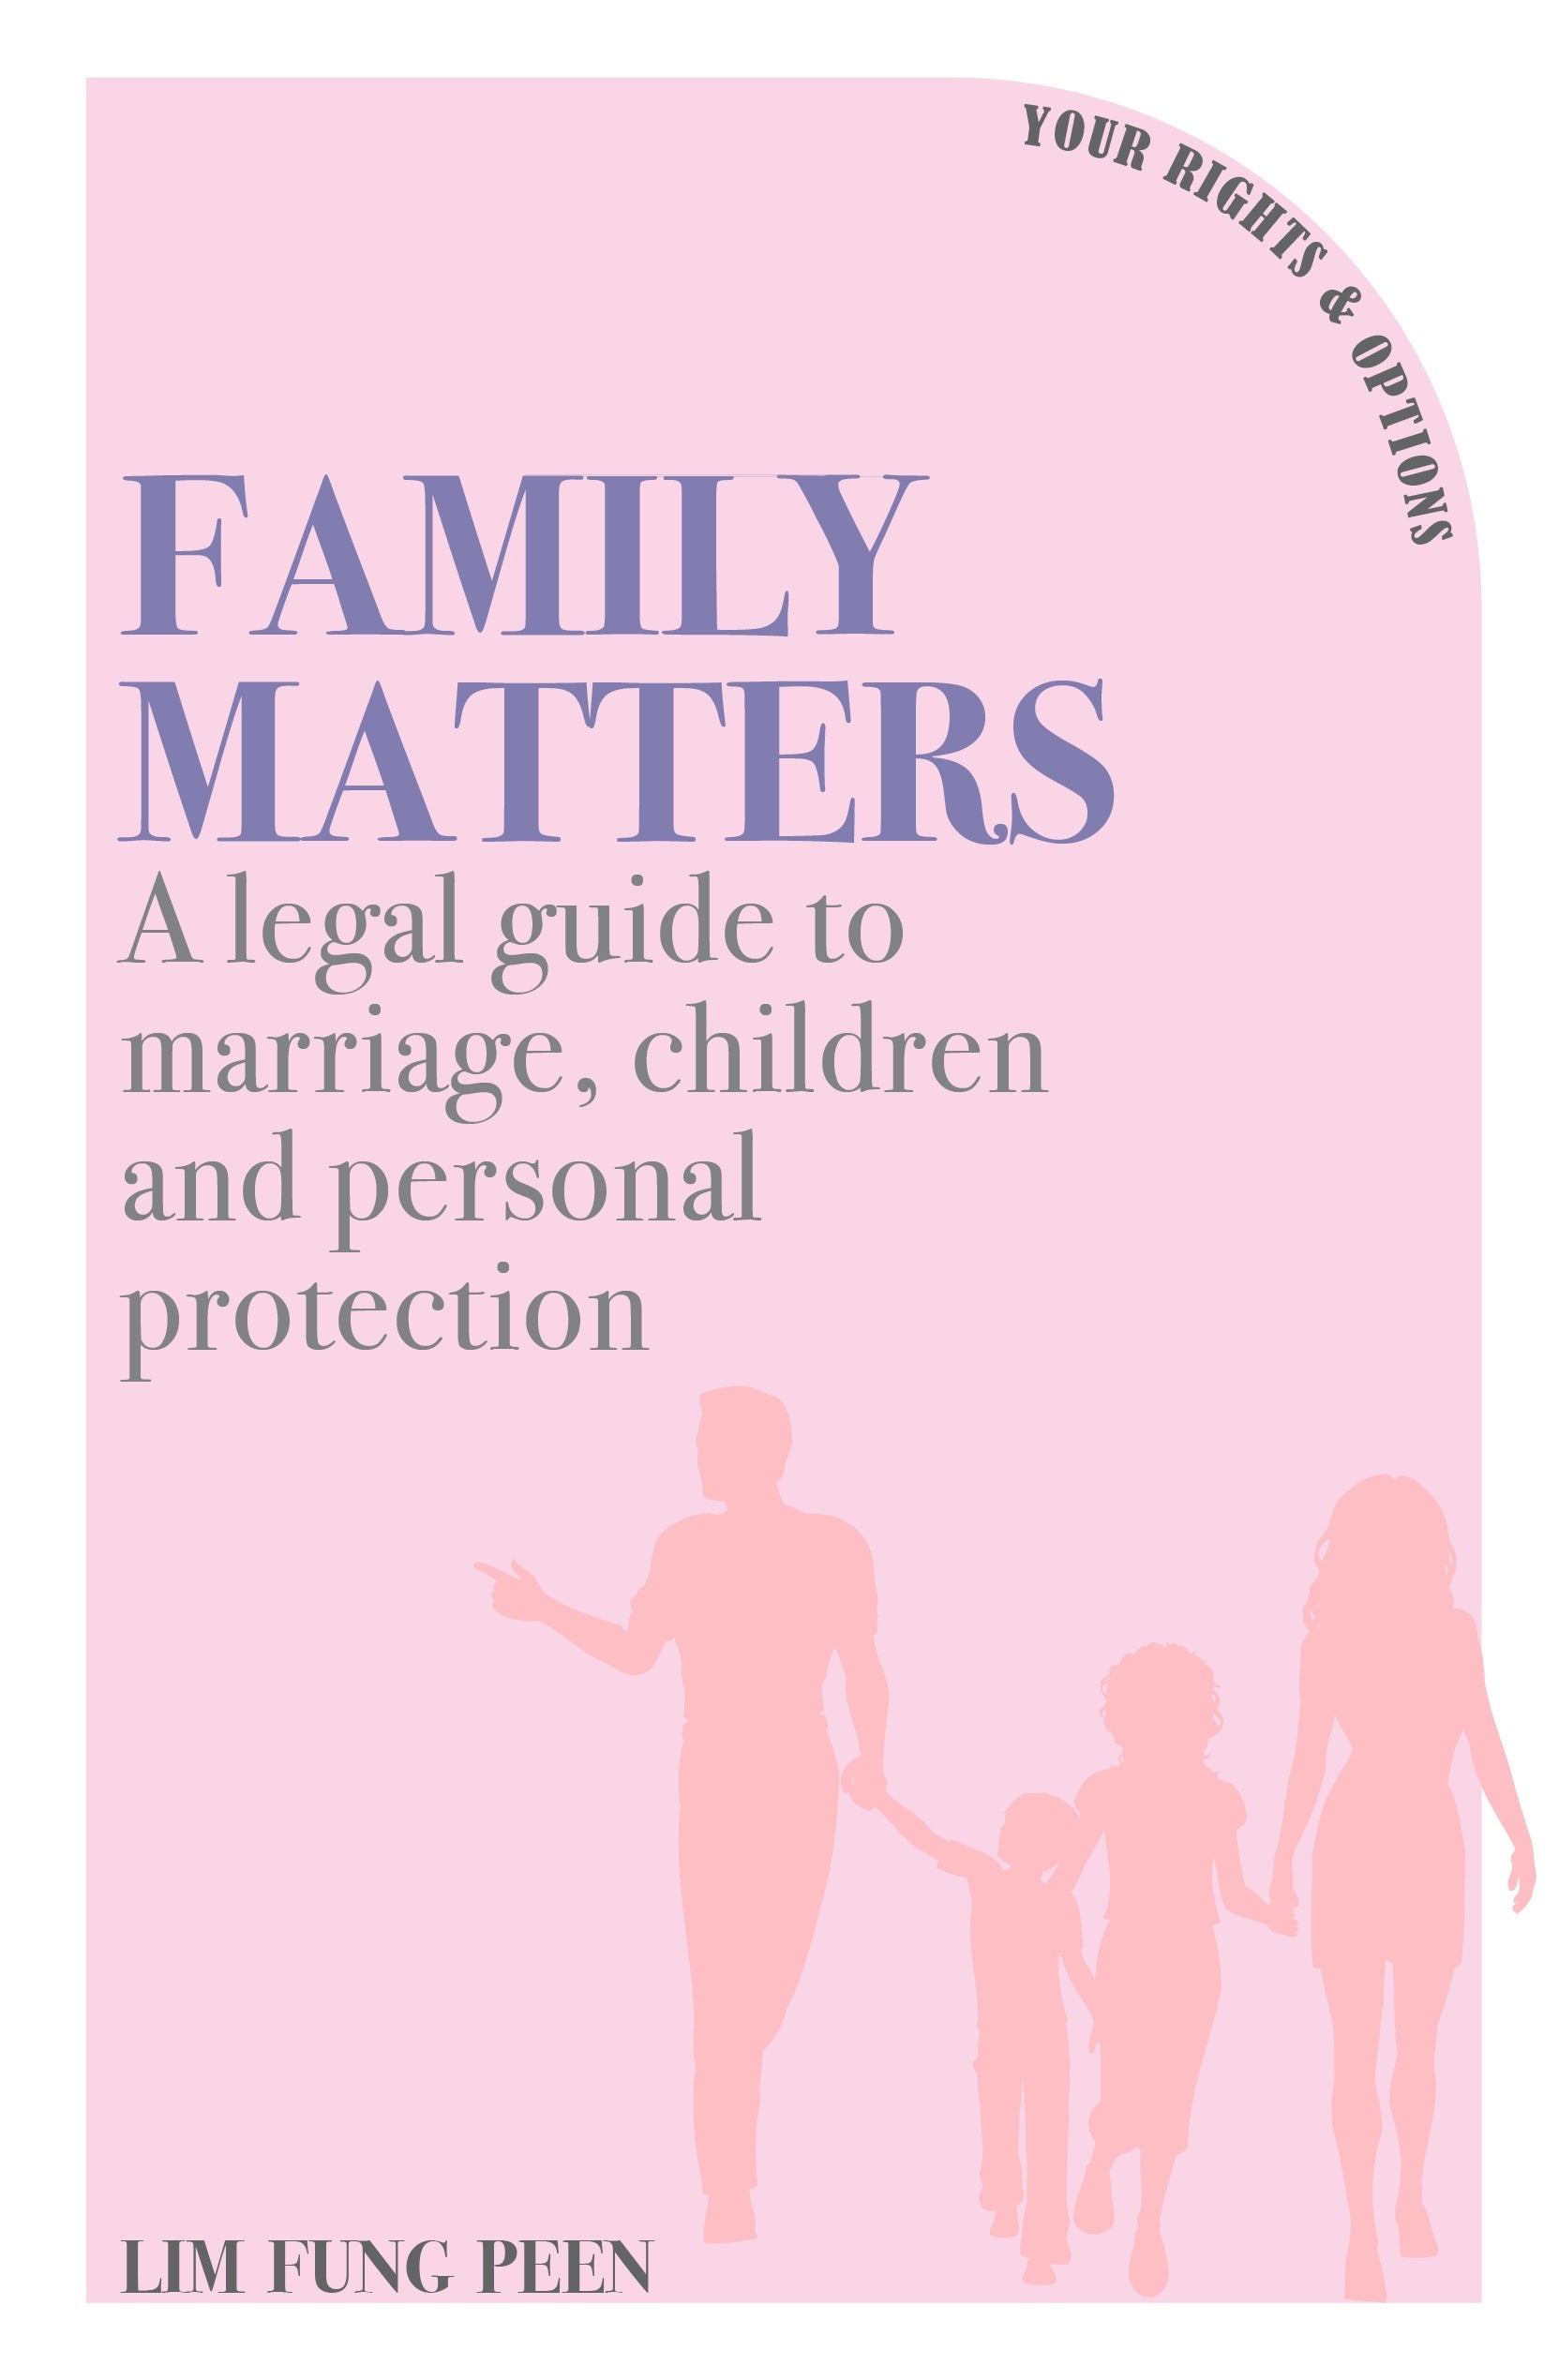 Family Matters: A legal guide to marriage, children and personal protection